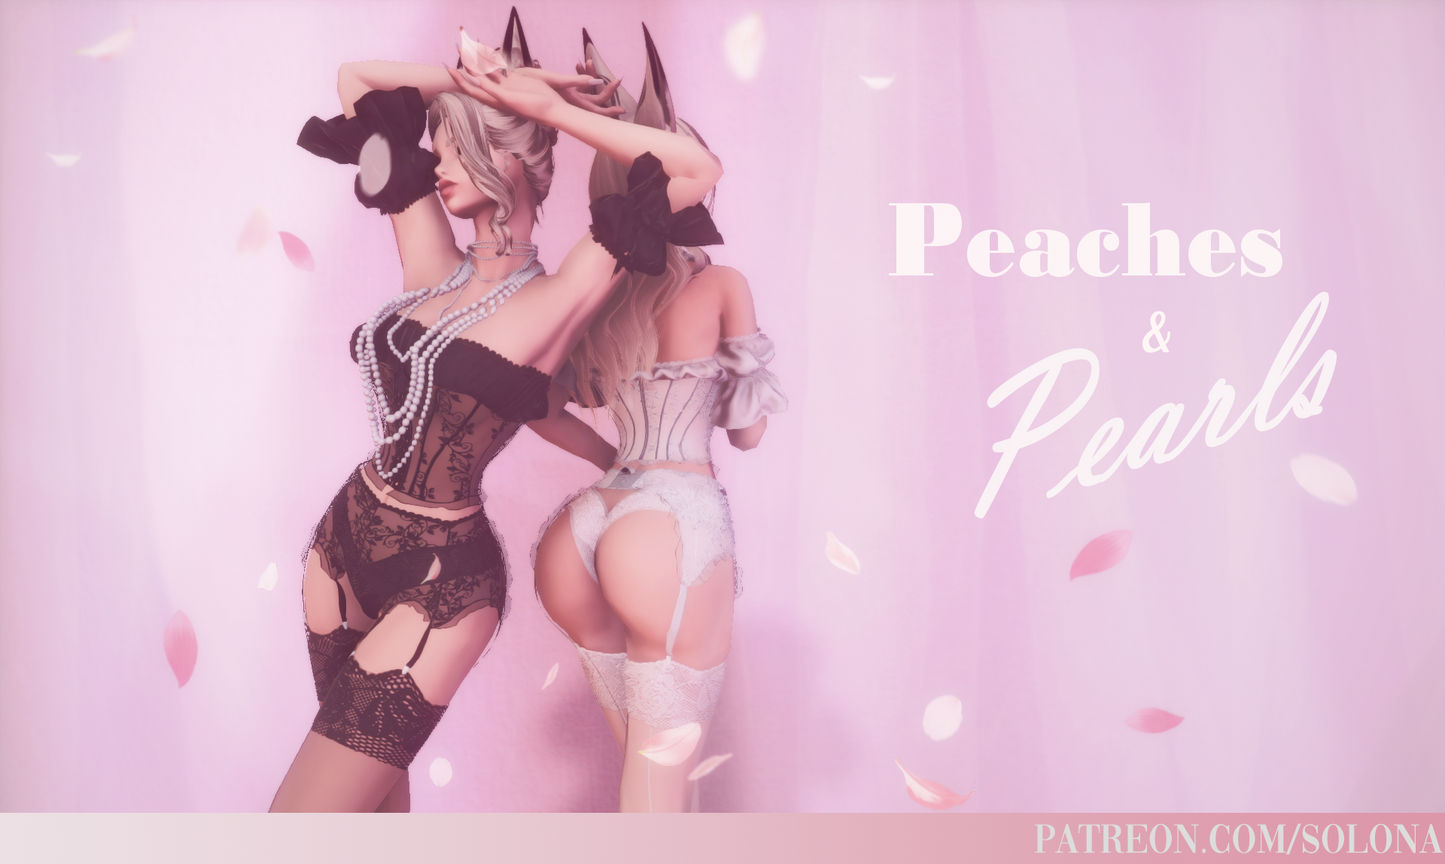 Peaches and Pearls